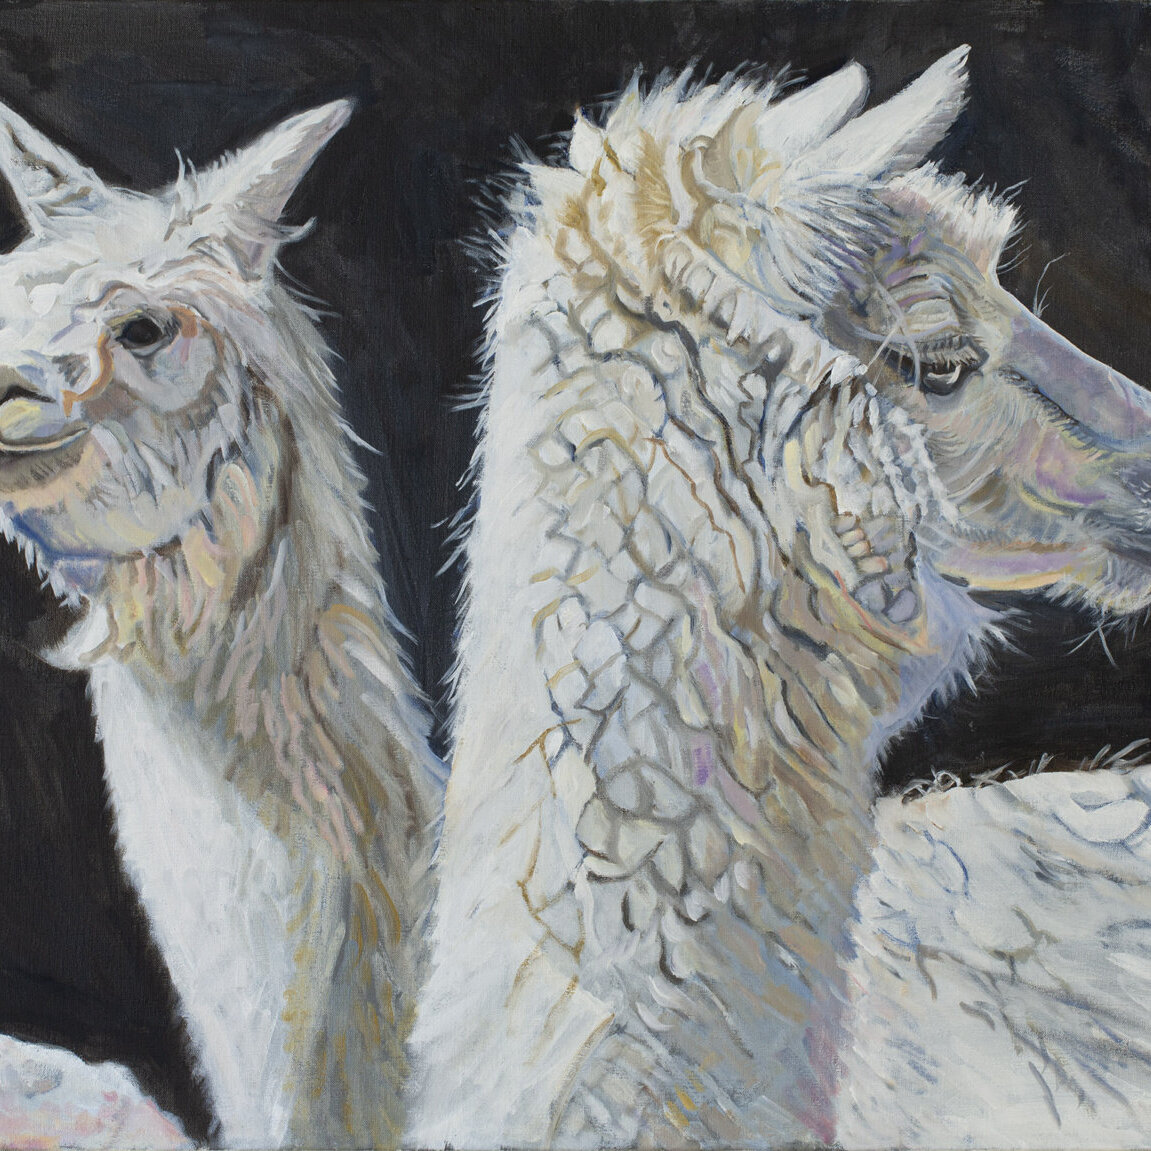 Oil Painting of Shy and Sophisticated Alpacas